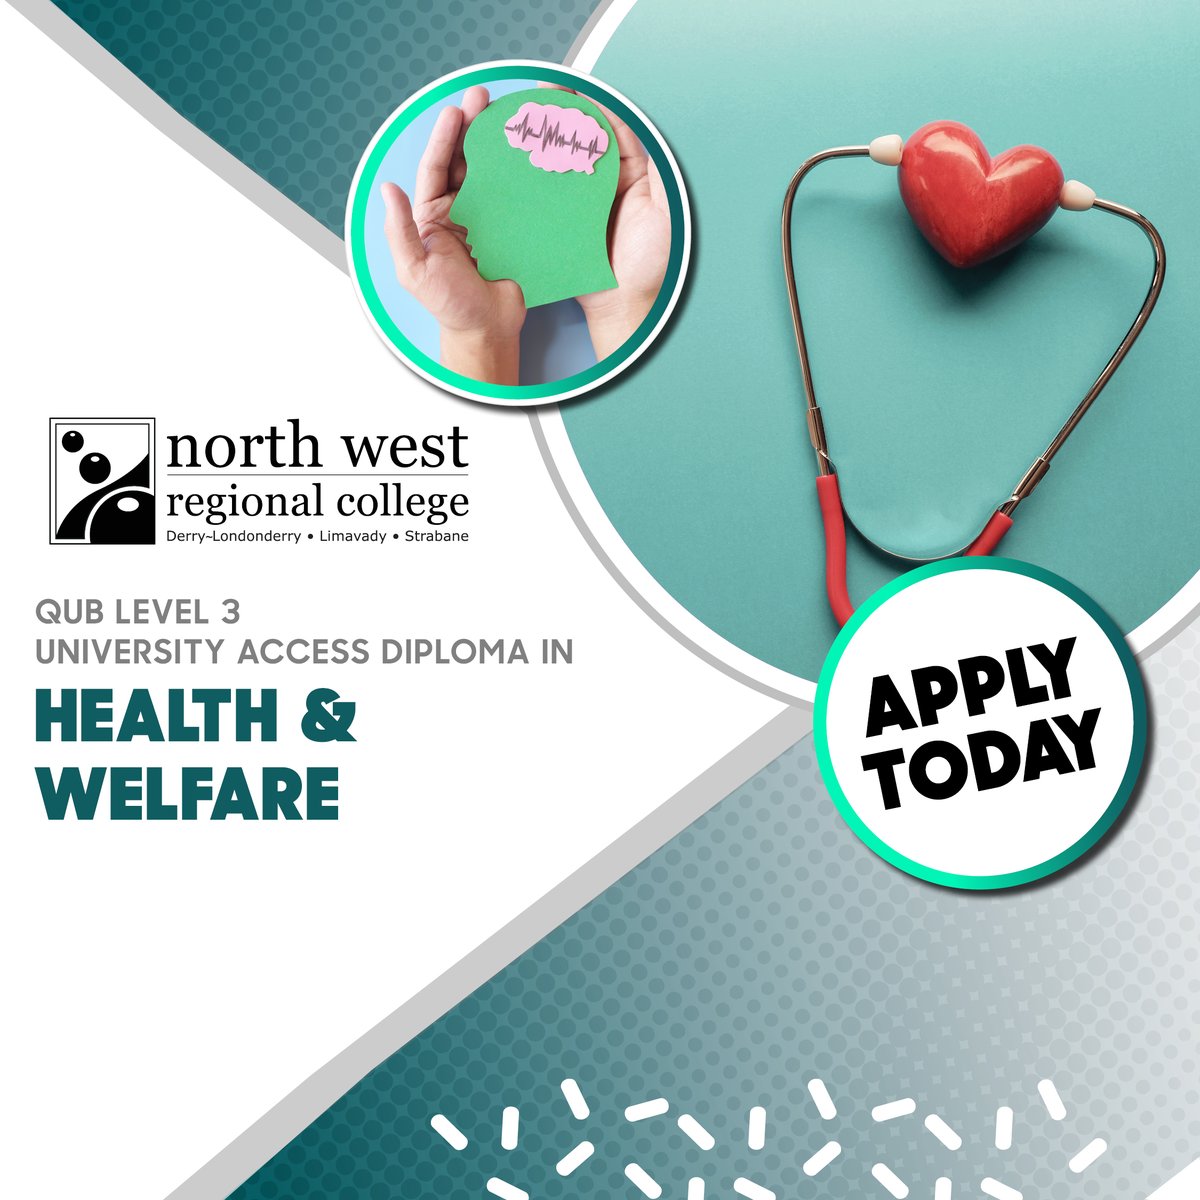 We have places available on the Adult Learning Access Diploma in Health & Welfare course where you will study subjects such as health & welfare; research; study skills; human anatomy & physiology; psychology & microbiology! Apply today at: shorturl.at/jppVF